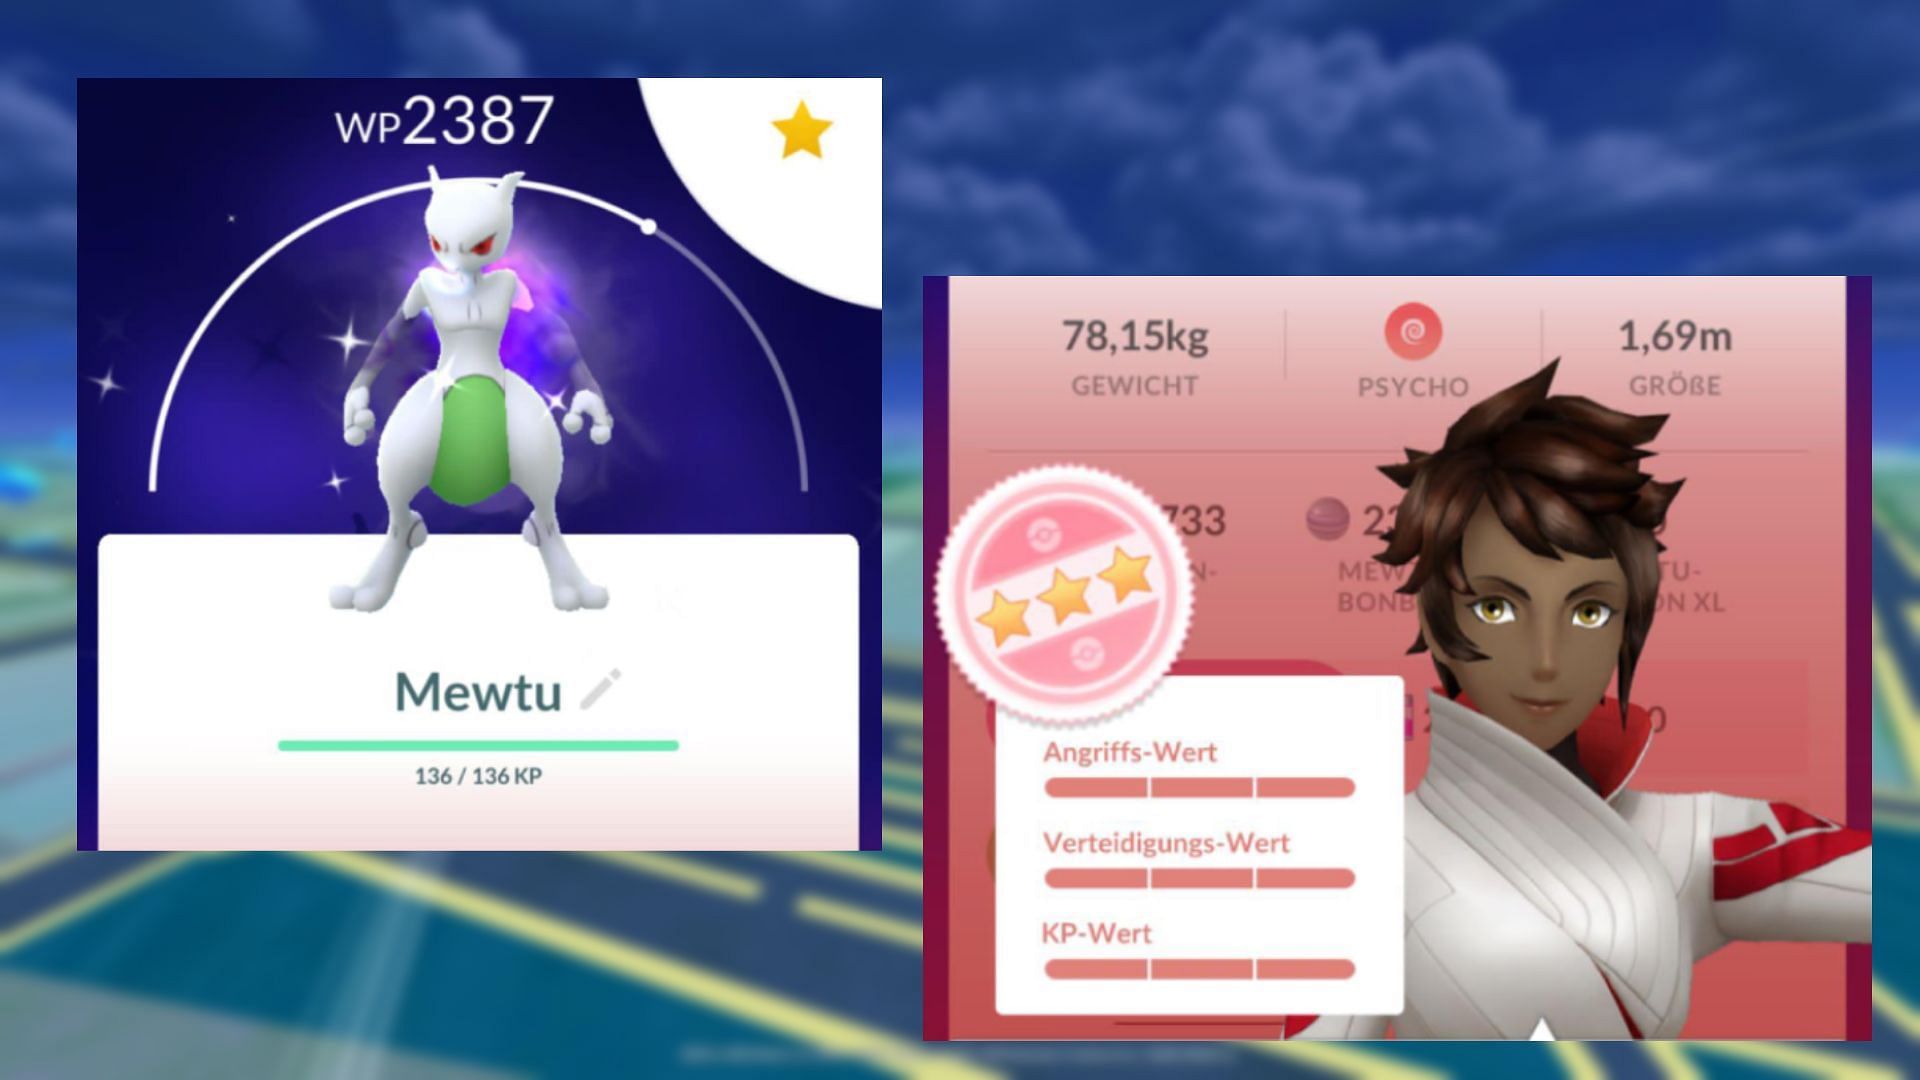 “Luck overload” Pokemon GO player shares rare Shadow Mewtwo catch